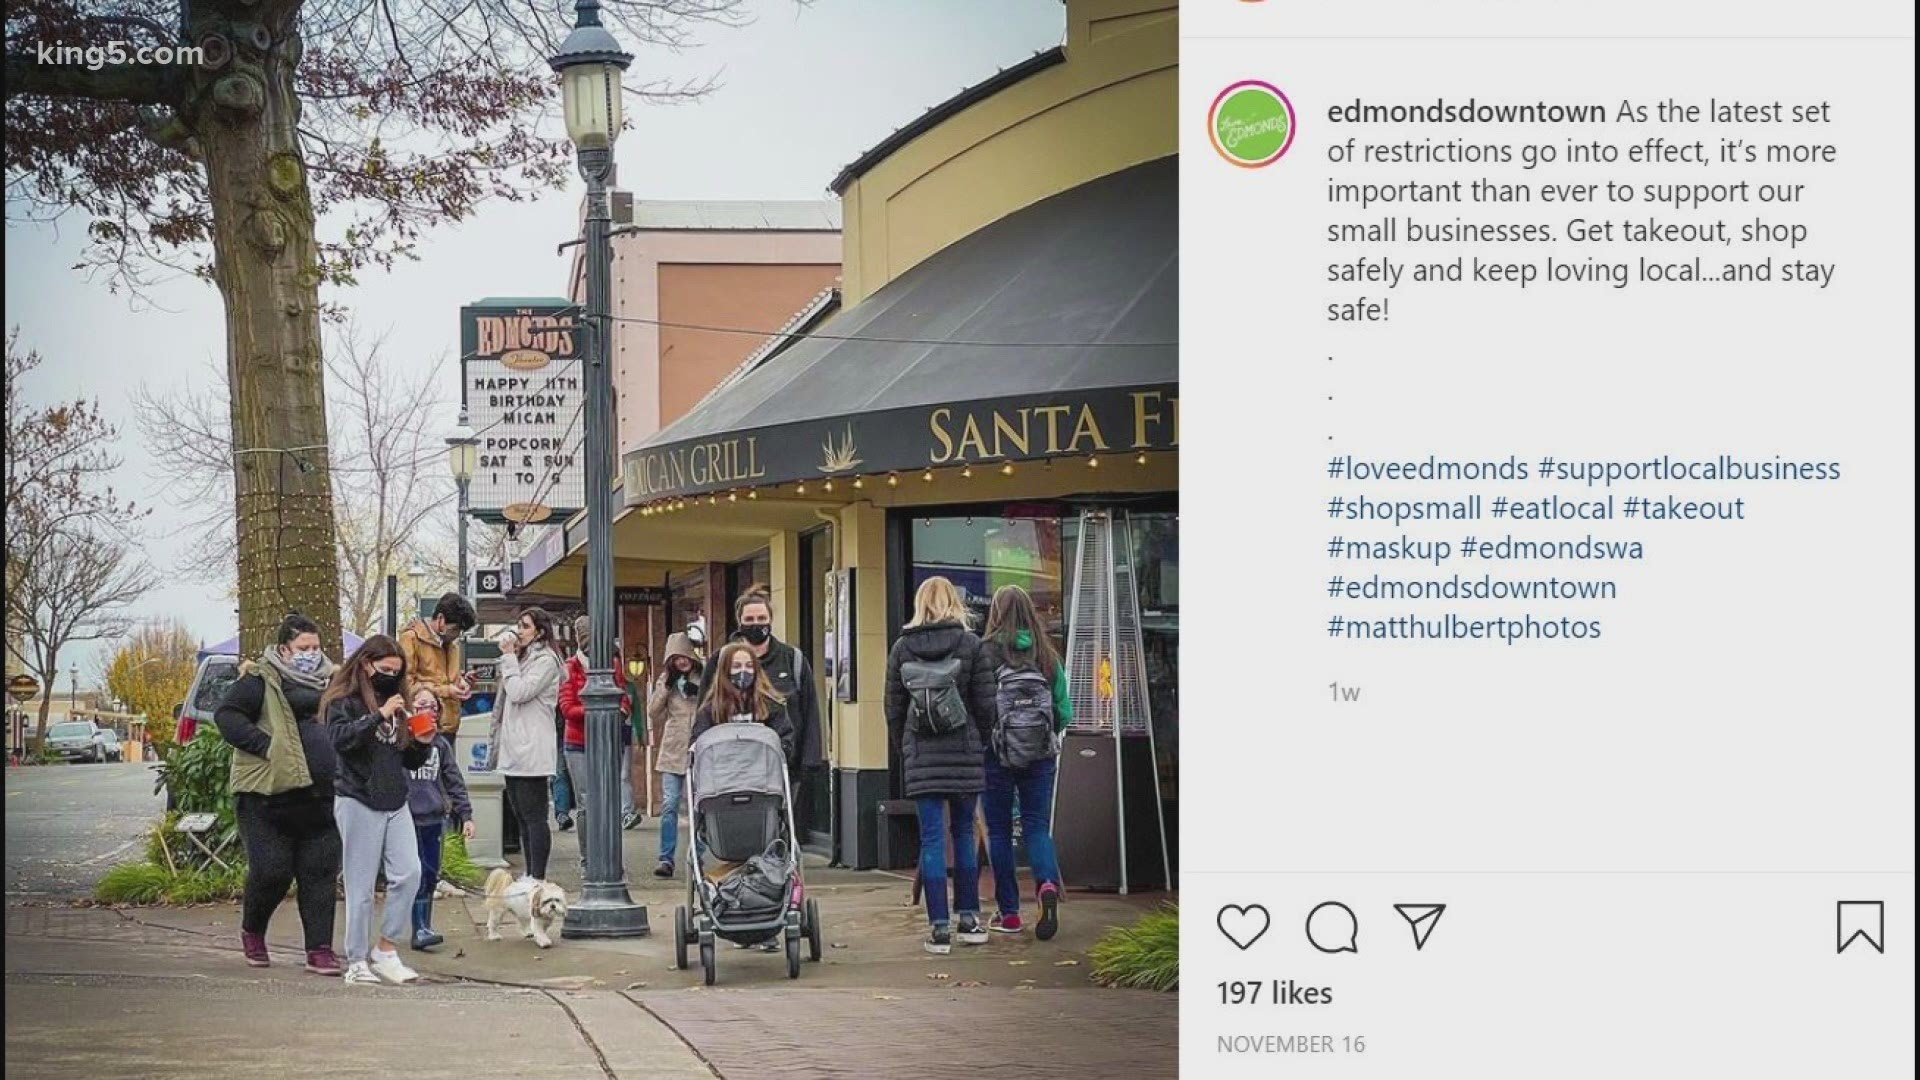 The city of Edmonds is encouraging people to shop and eat at local businesses and restaurants through a holiday promotion called "First Dibs."